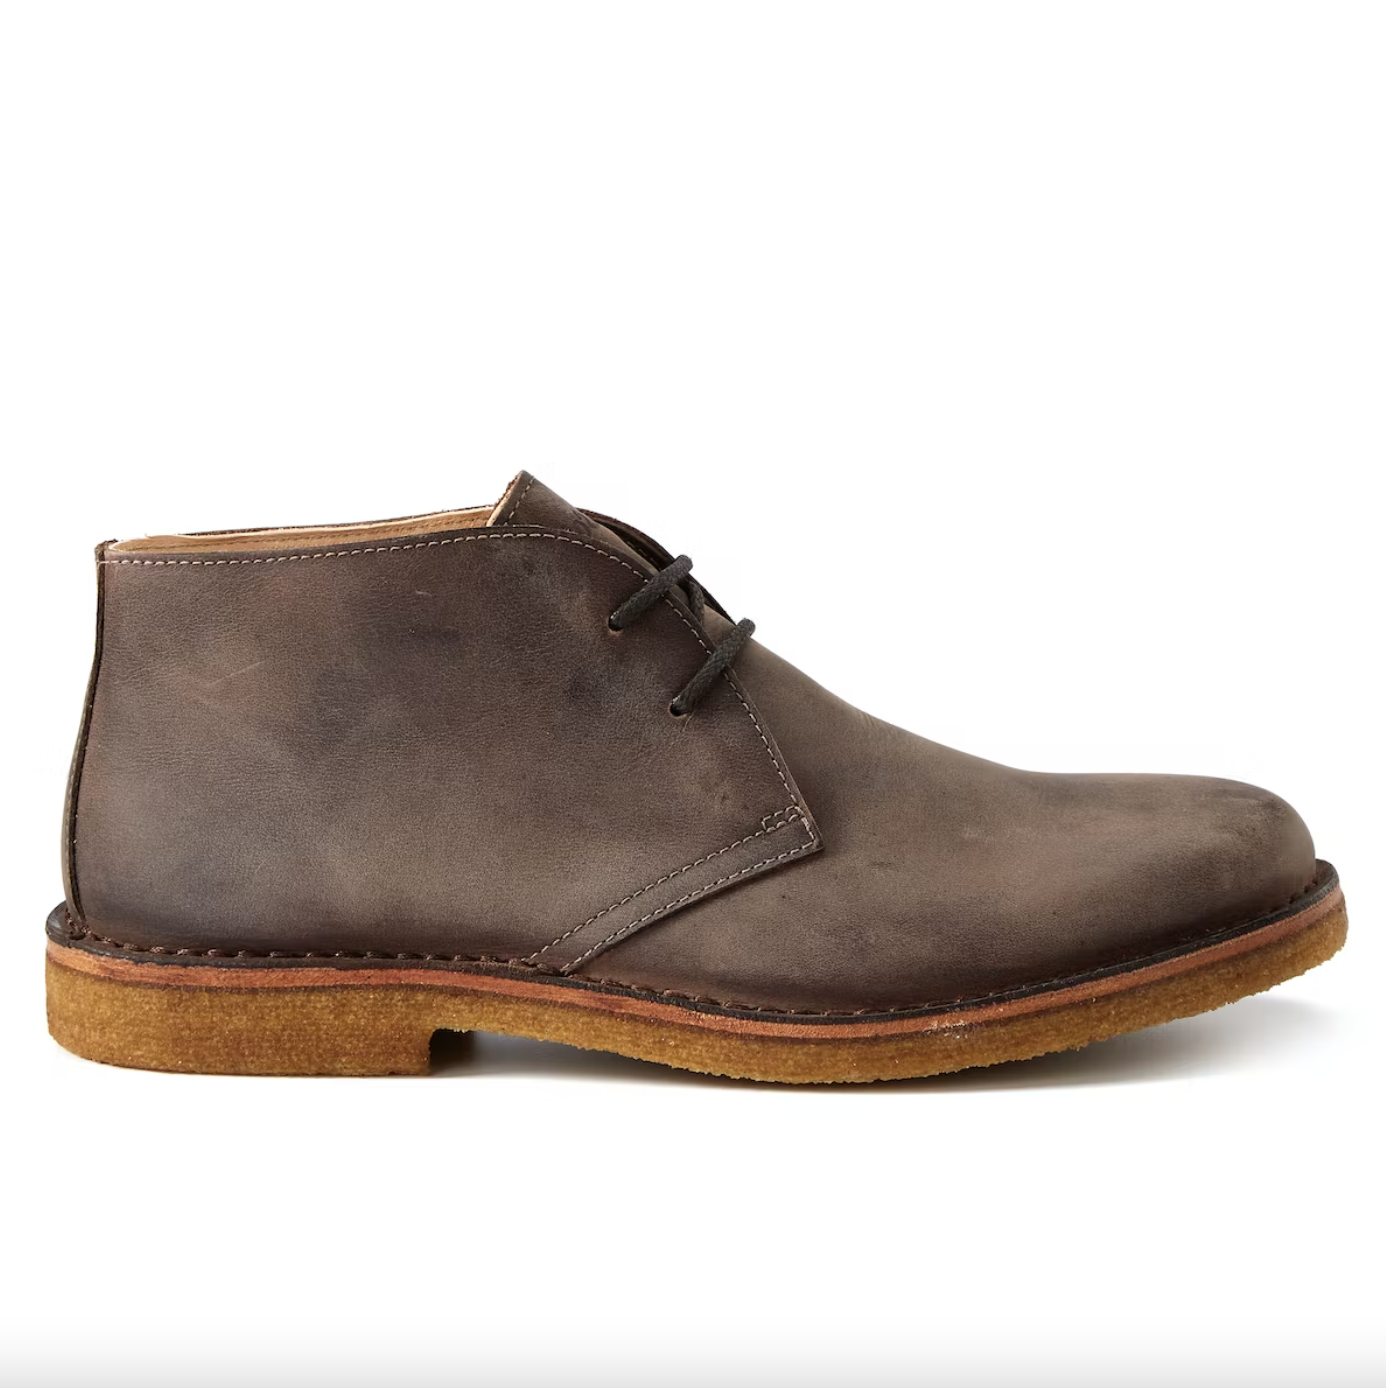 Get To Stepping This Fall With Men's Boots From Huckberry - BroBible